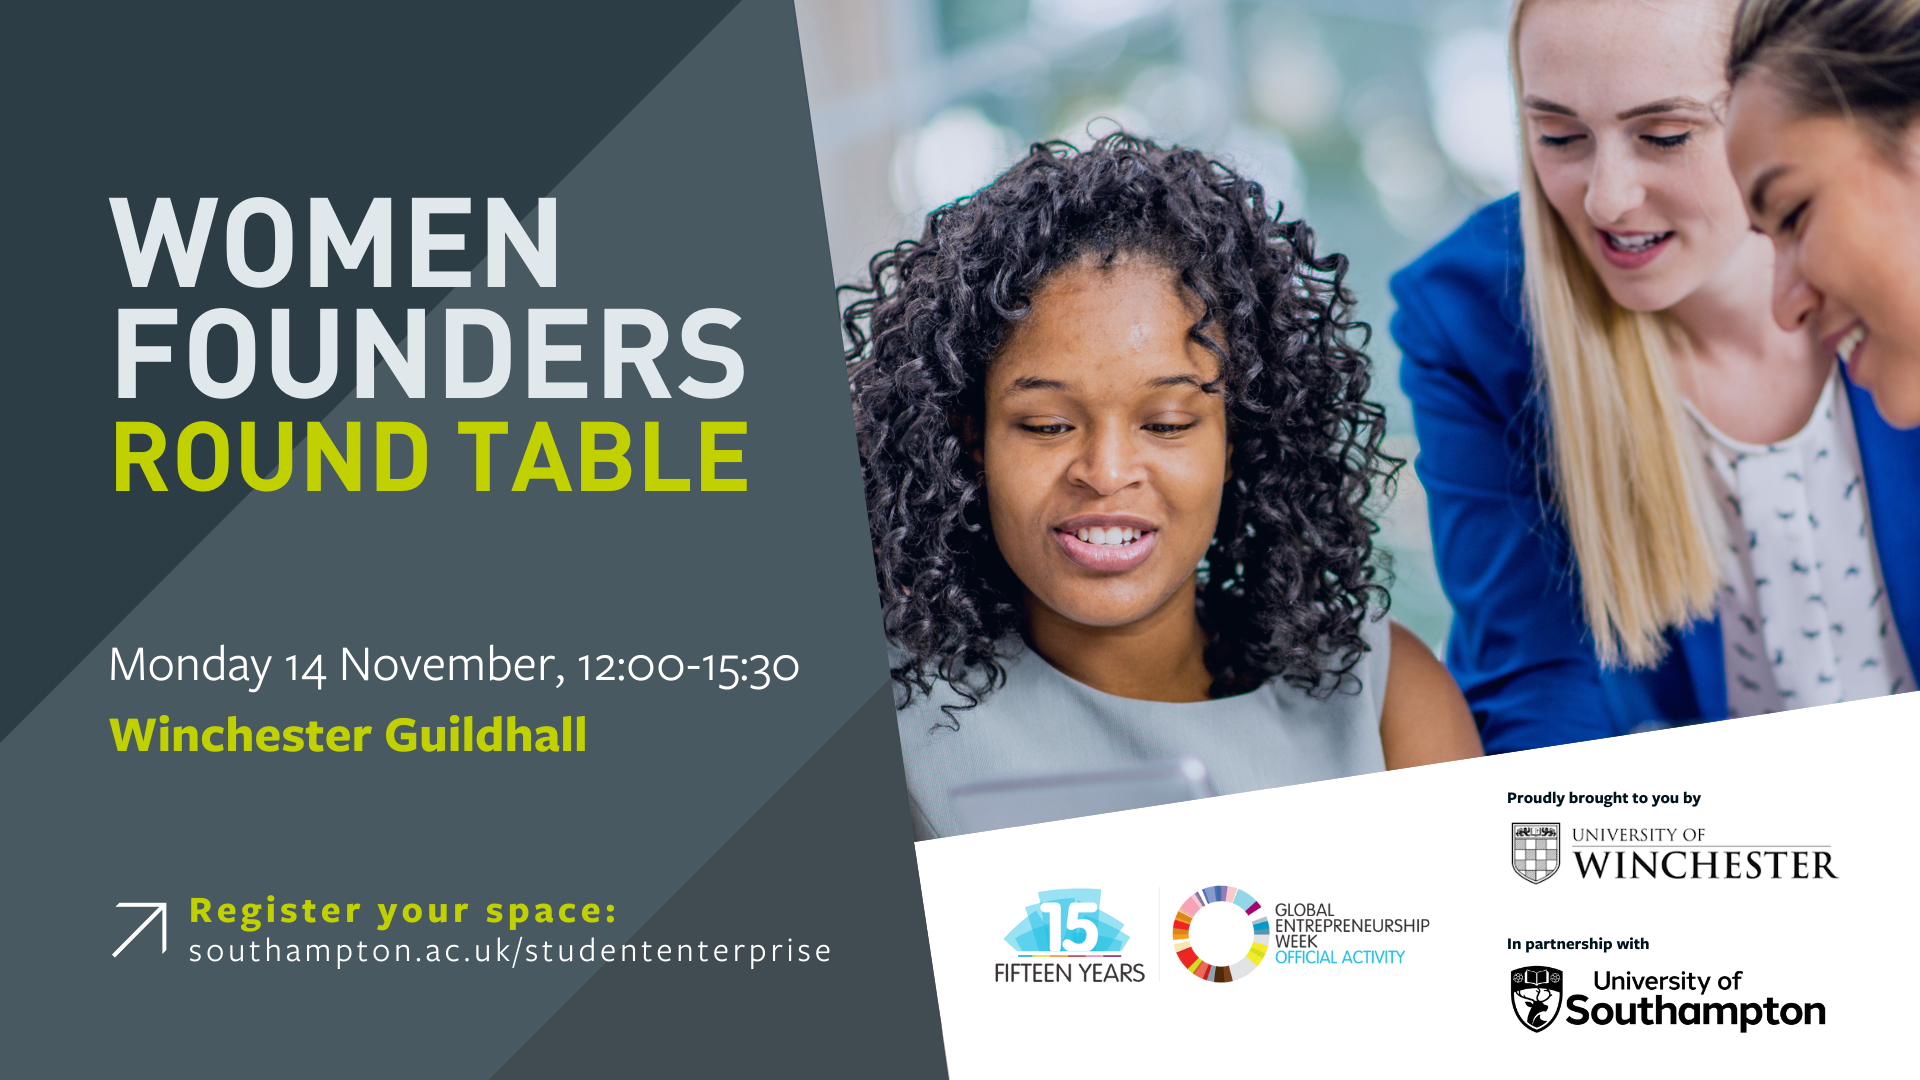 Women Founders Round Table